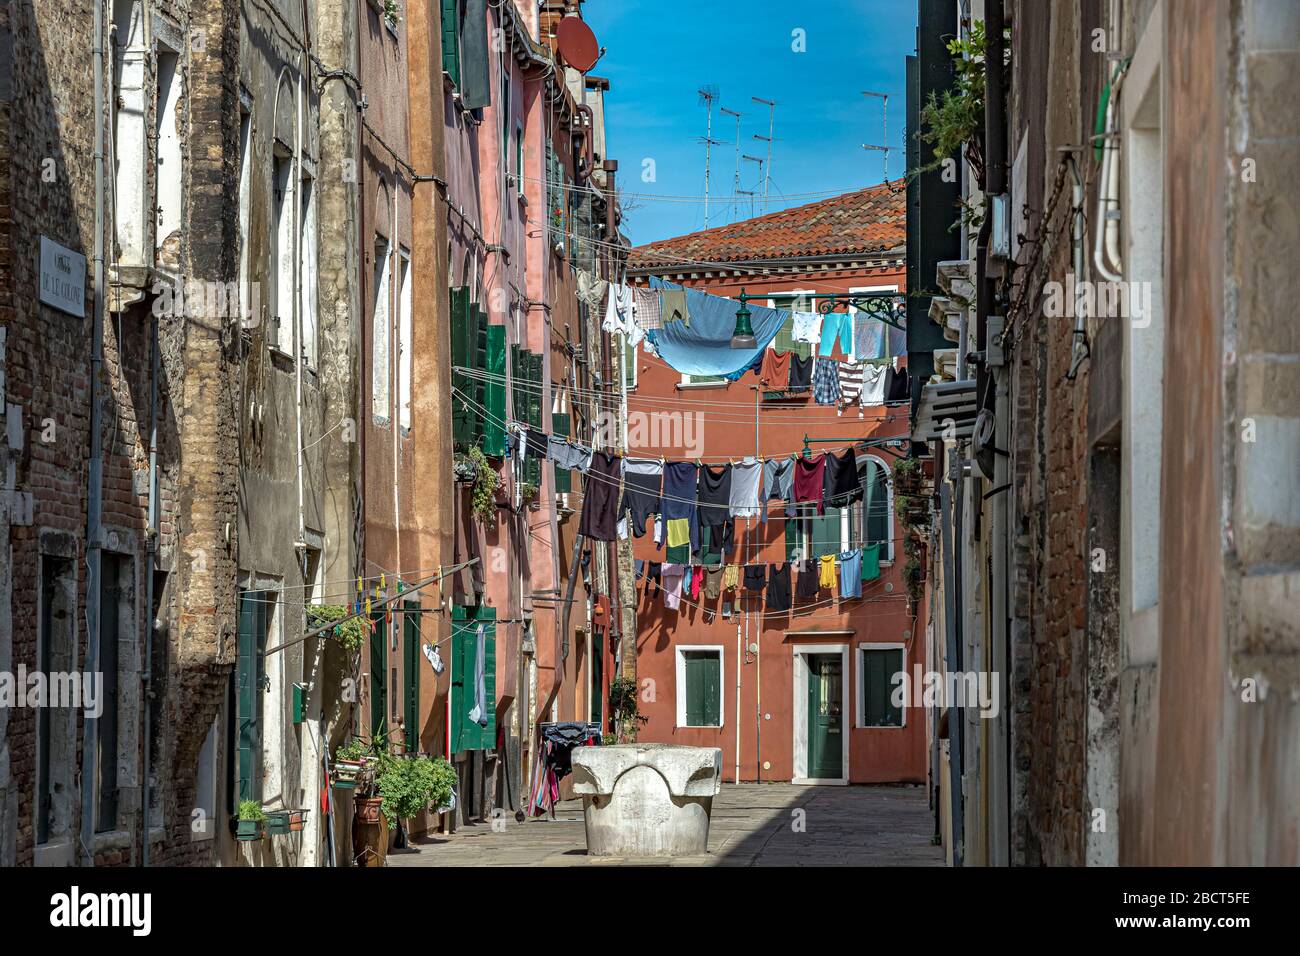 Washing hanging out to dry on washing line strung between houses in Corte Calle Colonne a small narrow courtyard in Venice,Italy Stock Photo